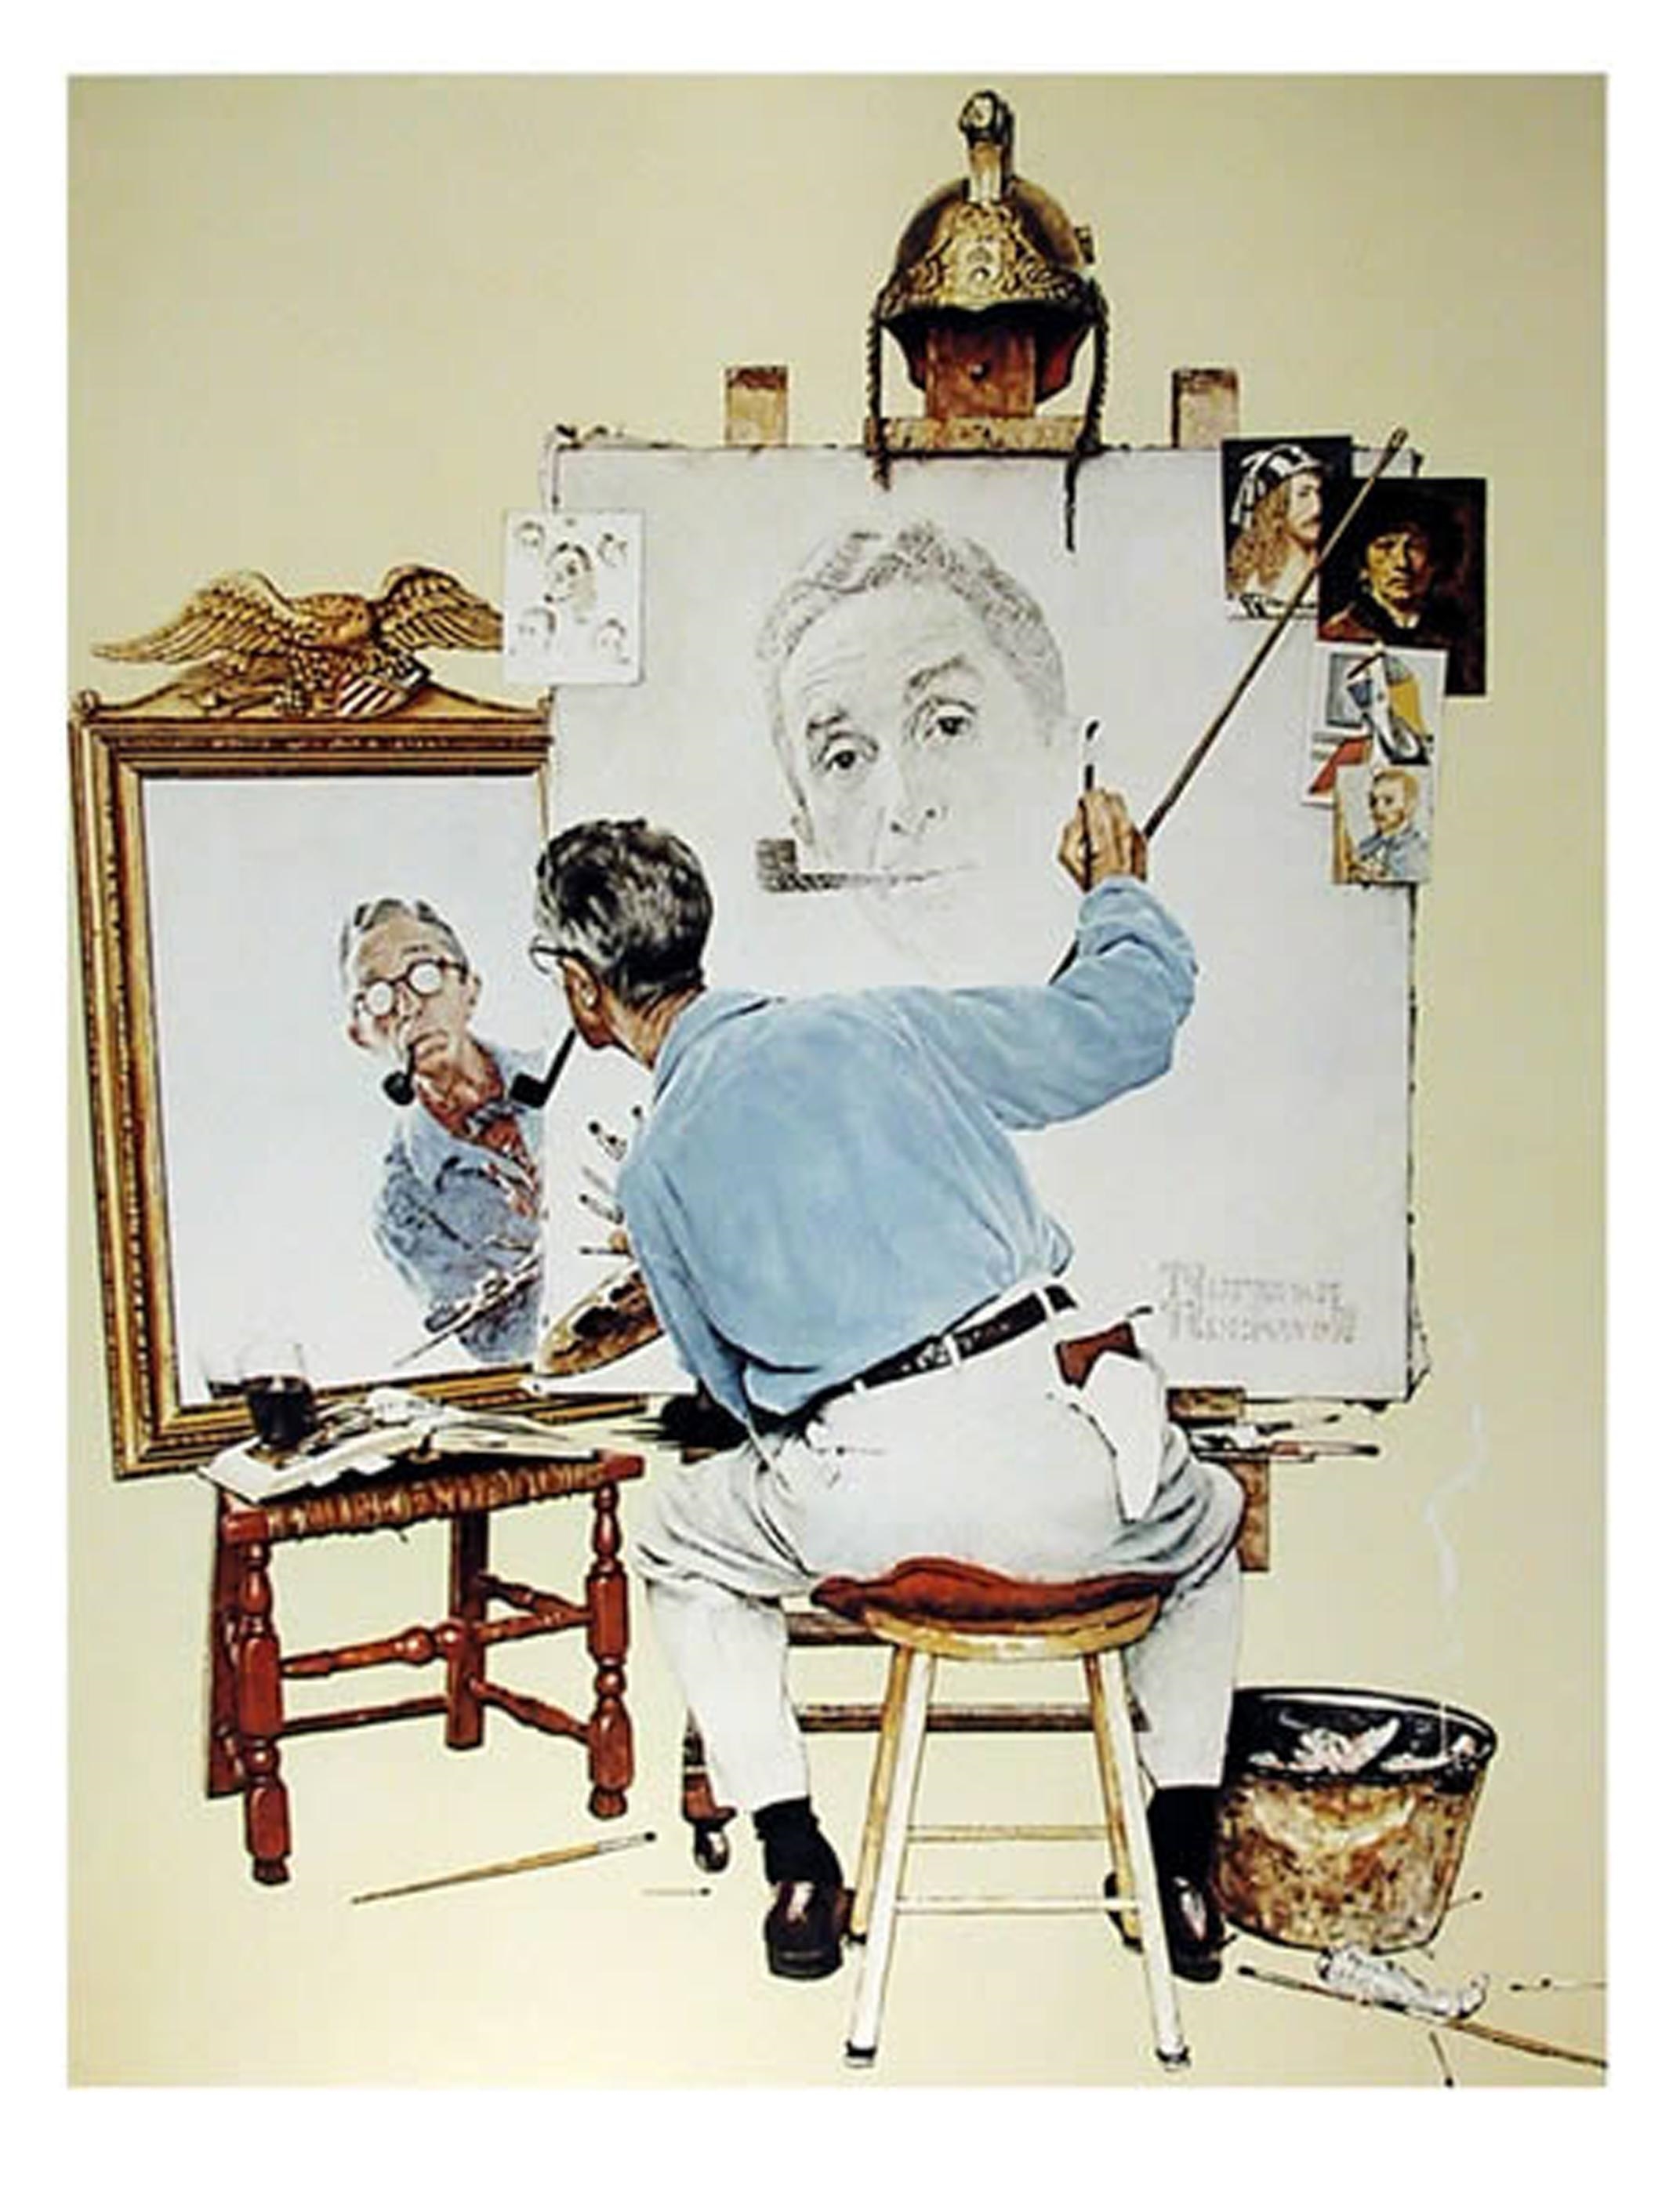 Artwork by Norman Rockwell, Biography, Made of Poster